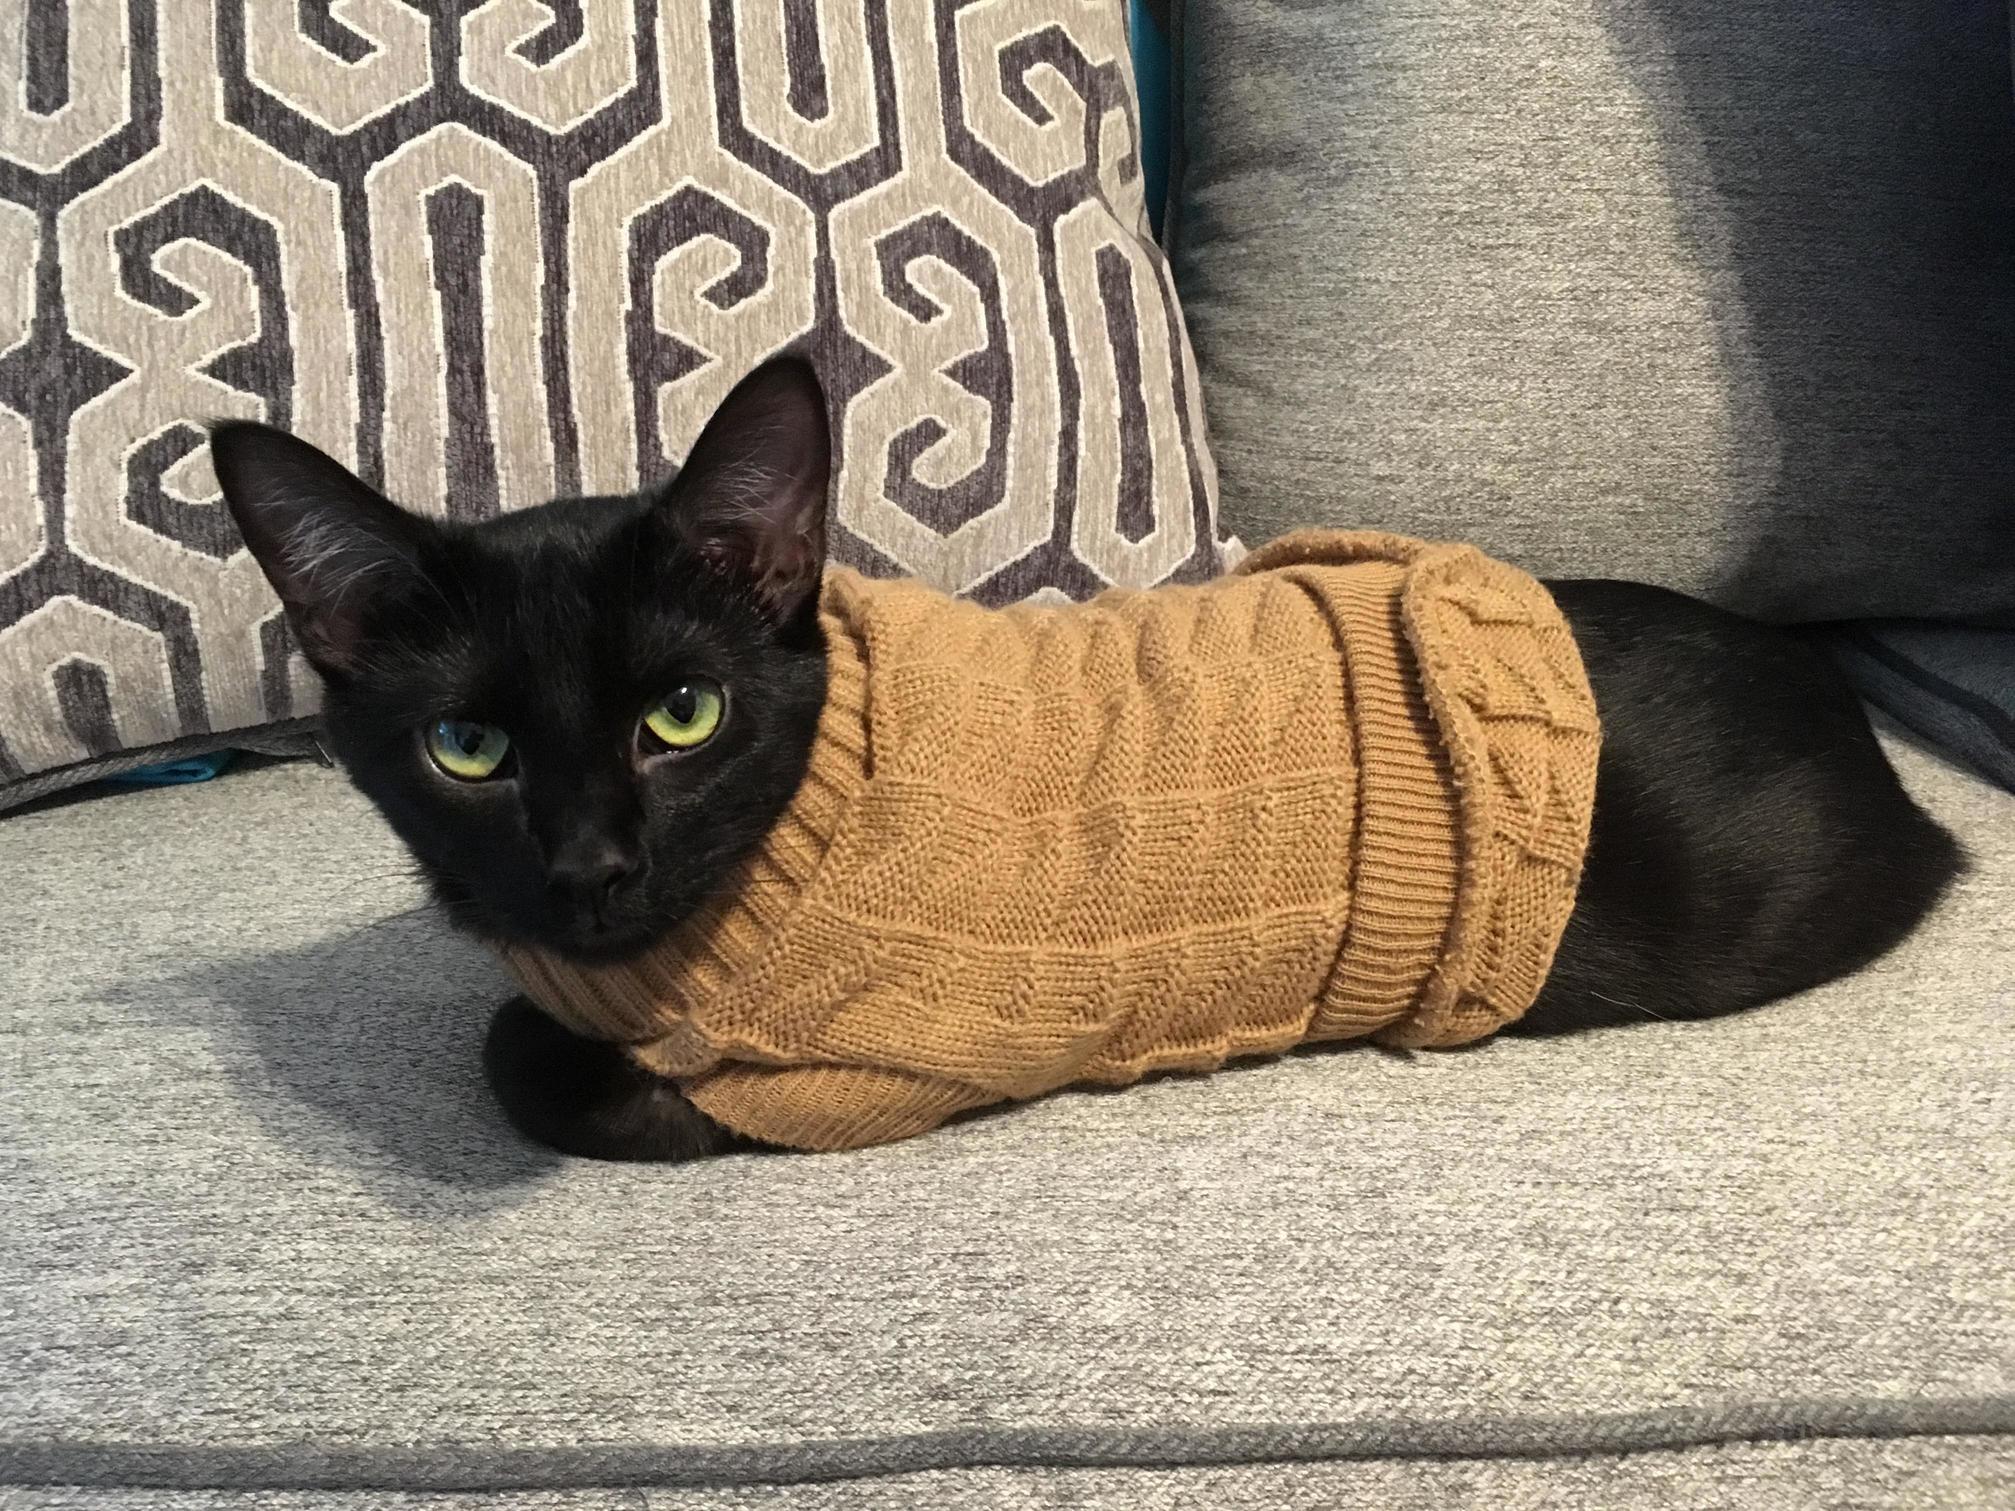 Lady arwen modeling her new sweater